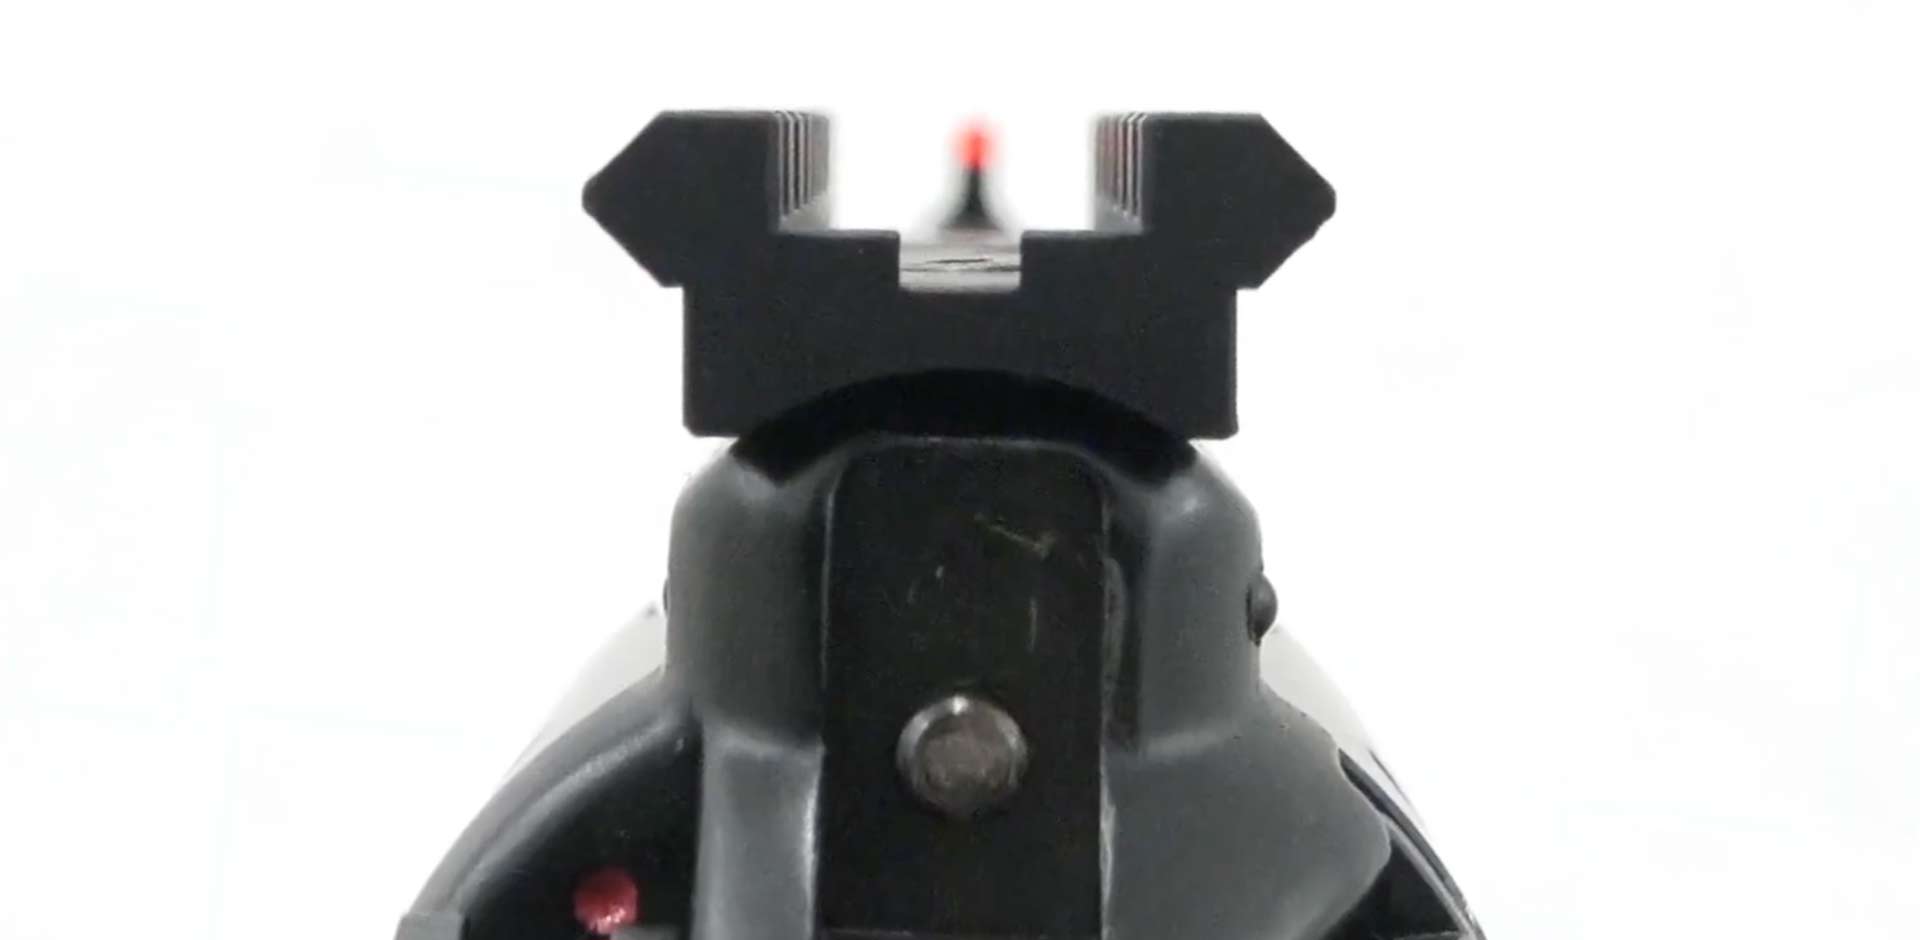 rear sight view of heritage rough rider tactical cowboy revolver